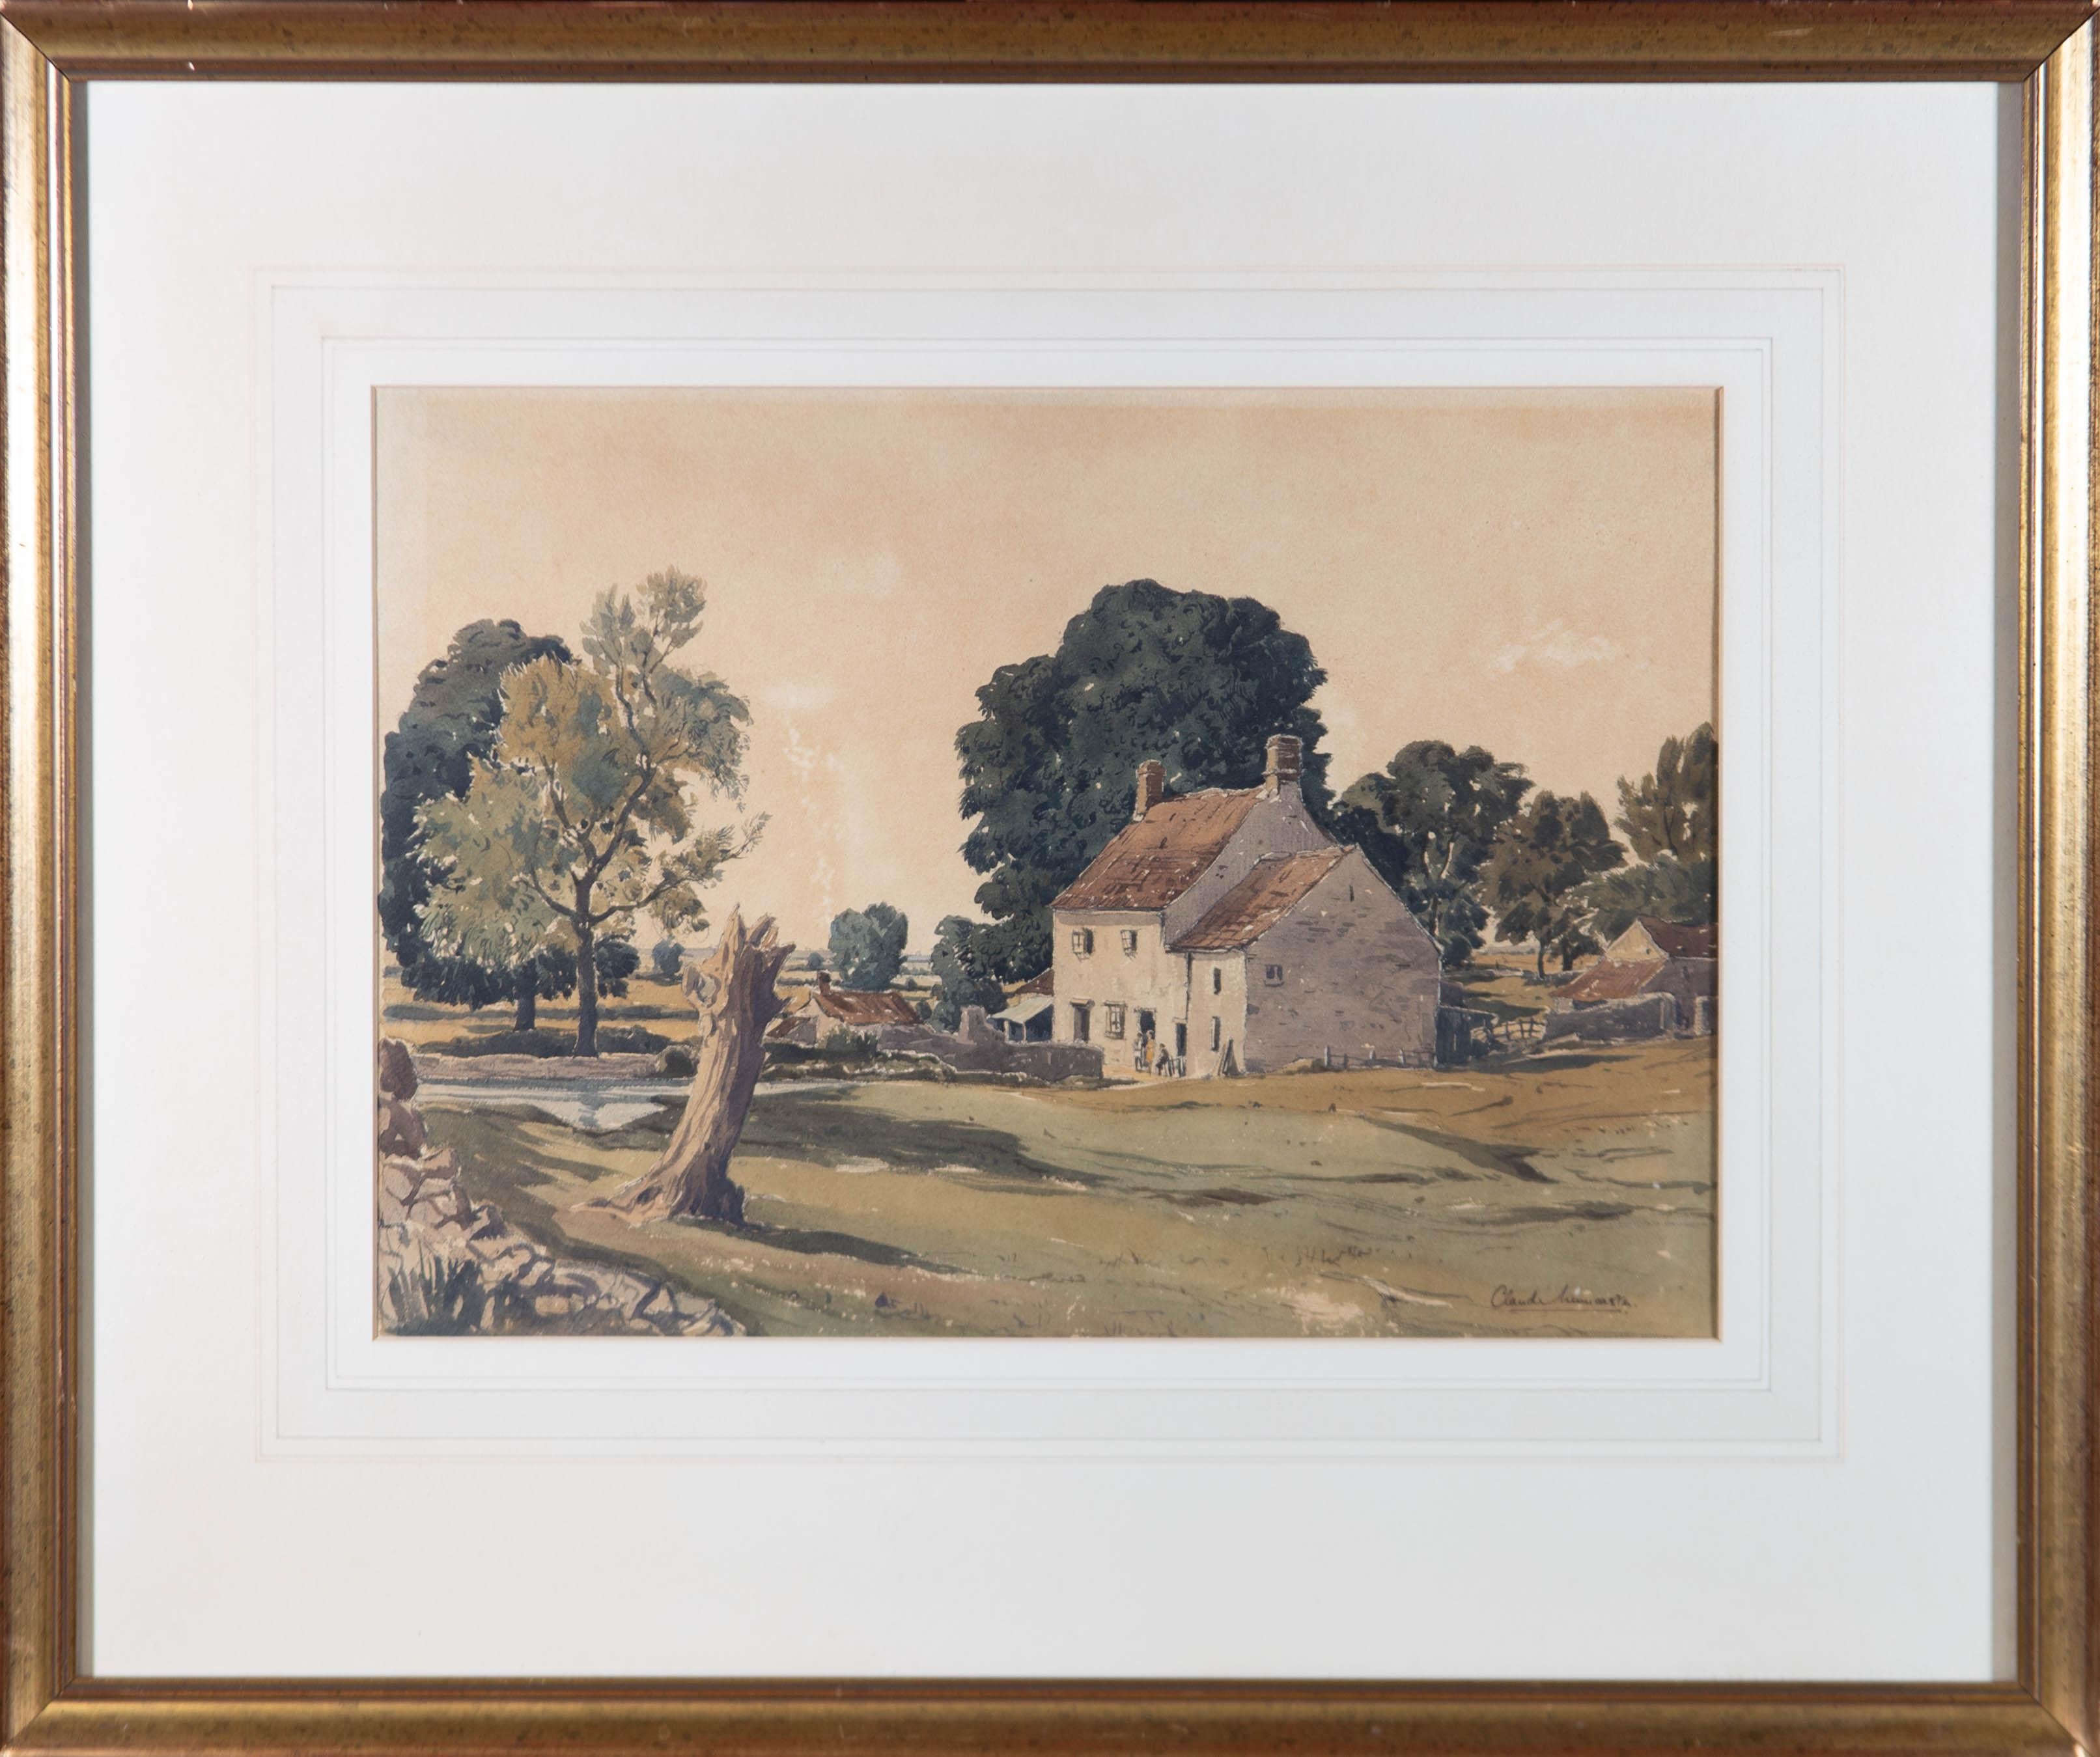 A striking rural watercolour showing a farmhouse cottage in a lush, green landscape. The artist shows great skill with the medium creating a graphic and bold landscape with great confidence of line.

The painting is signed to the lower right hand